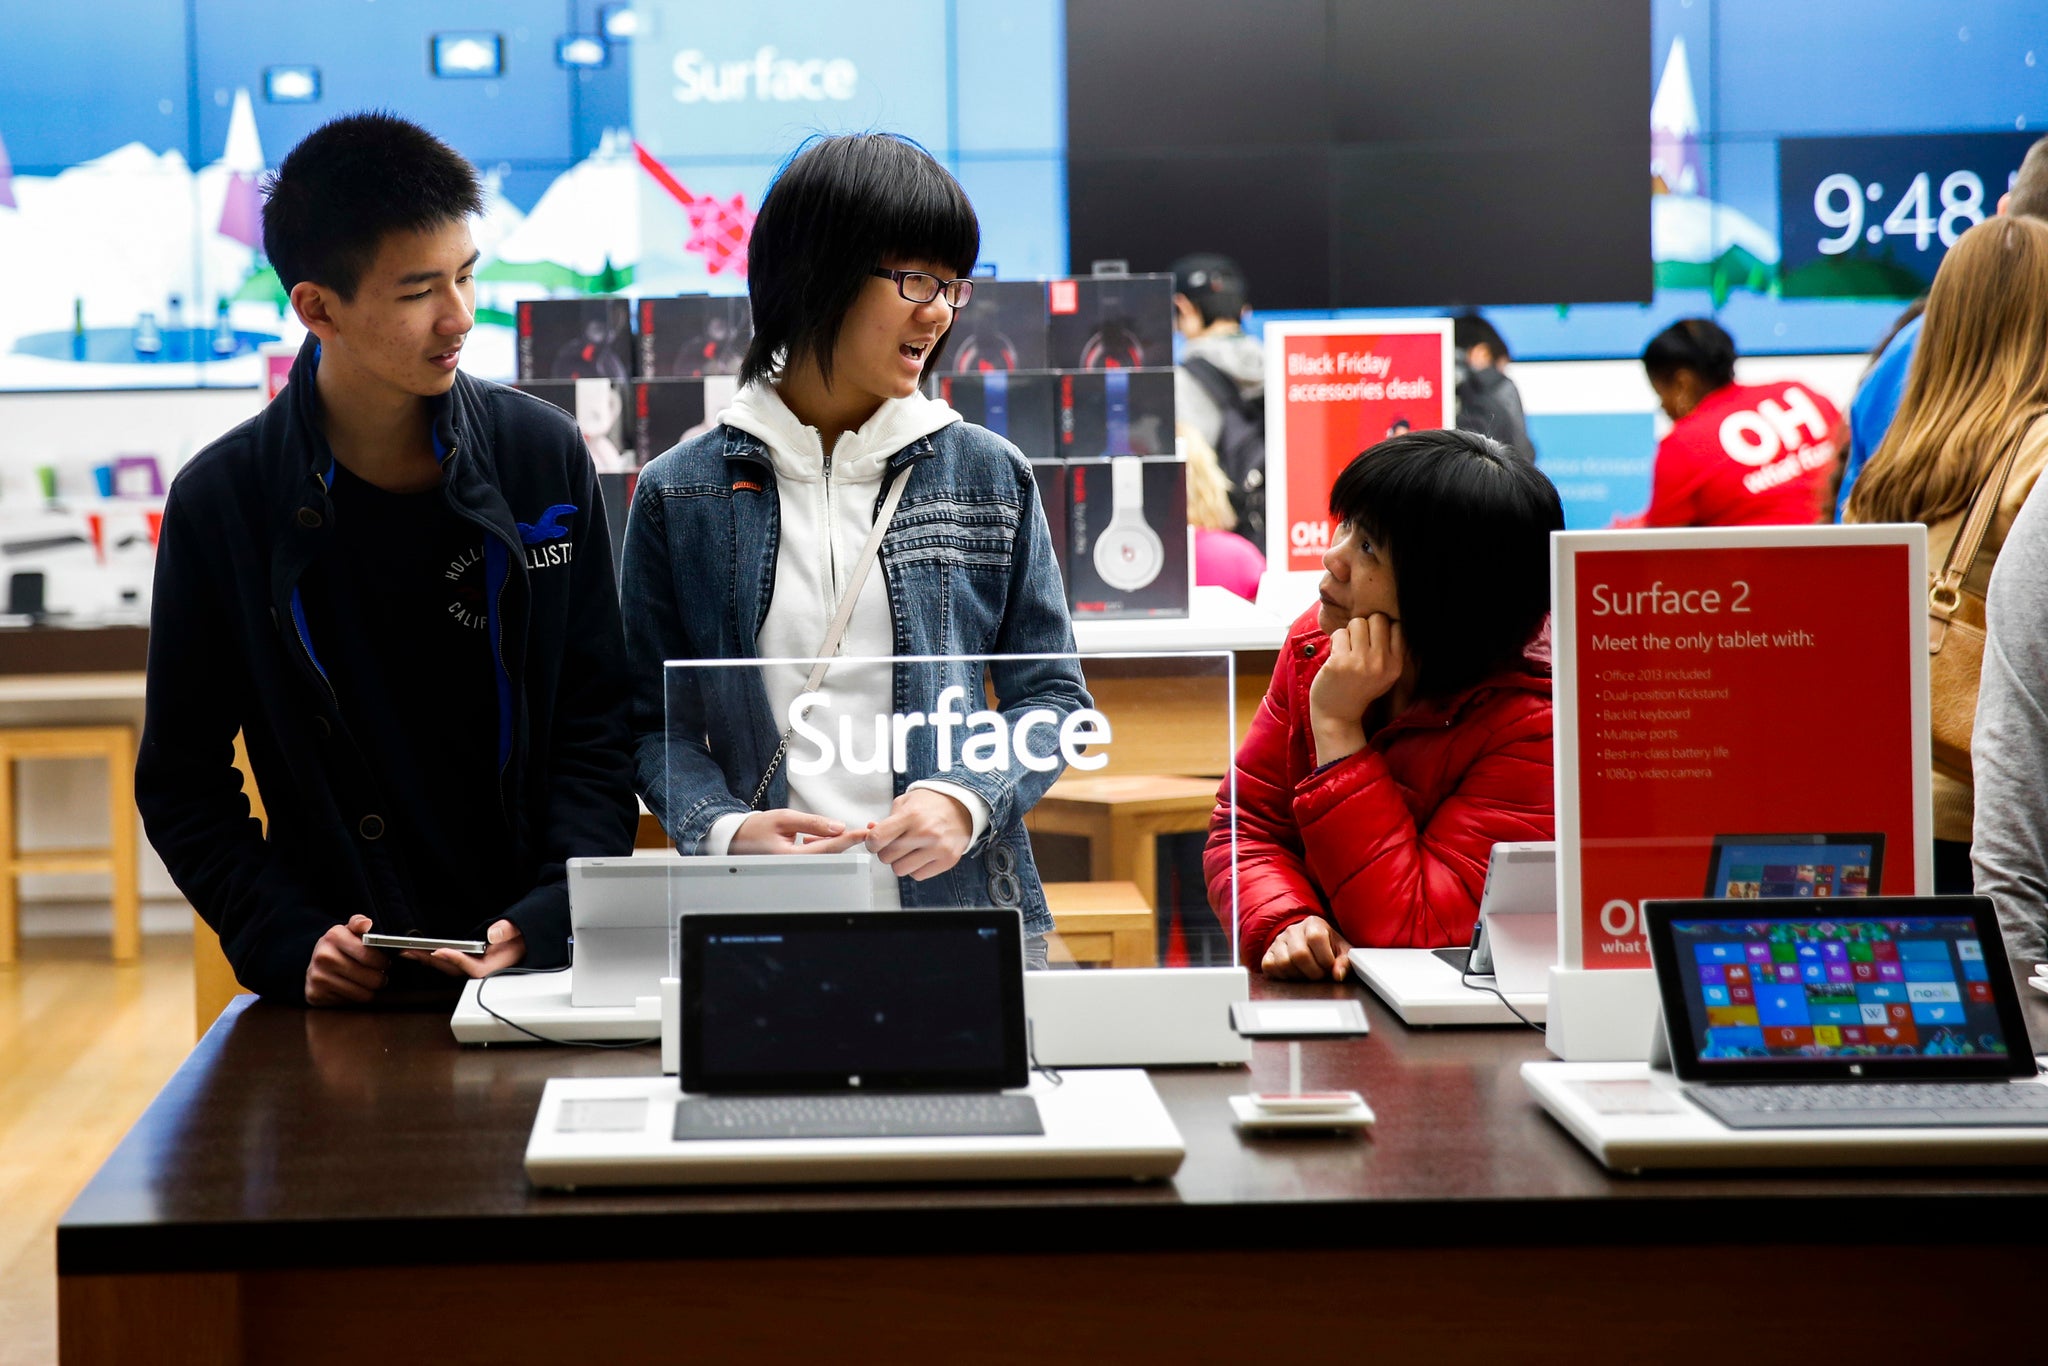 Sales of the Surface have beaten expectations - although the tablet market is still firmly dominated by Apple.